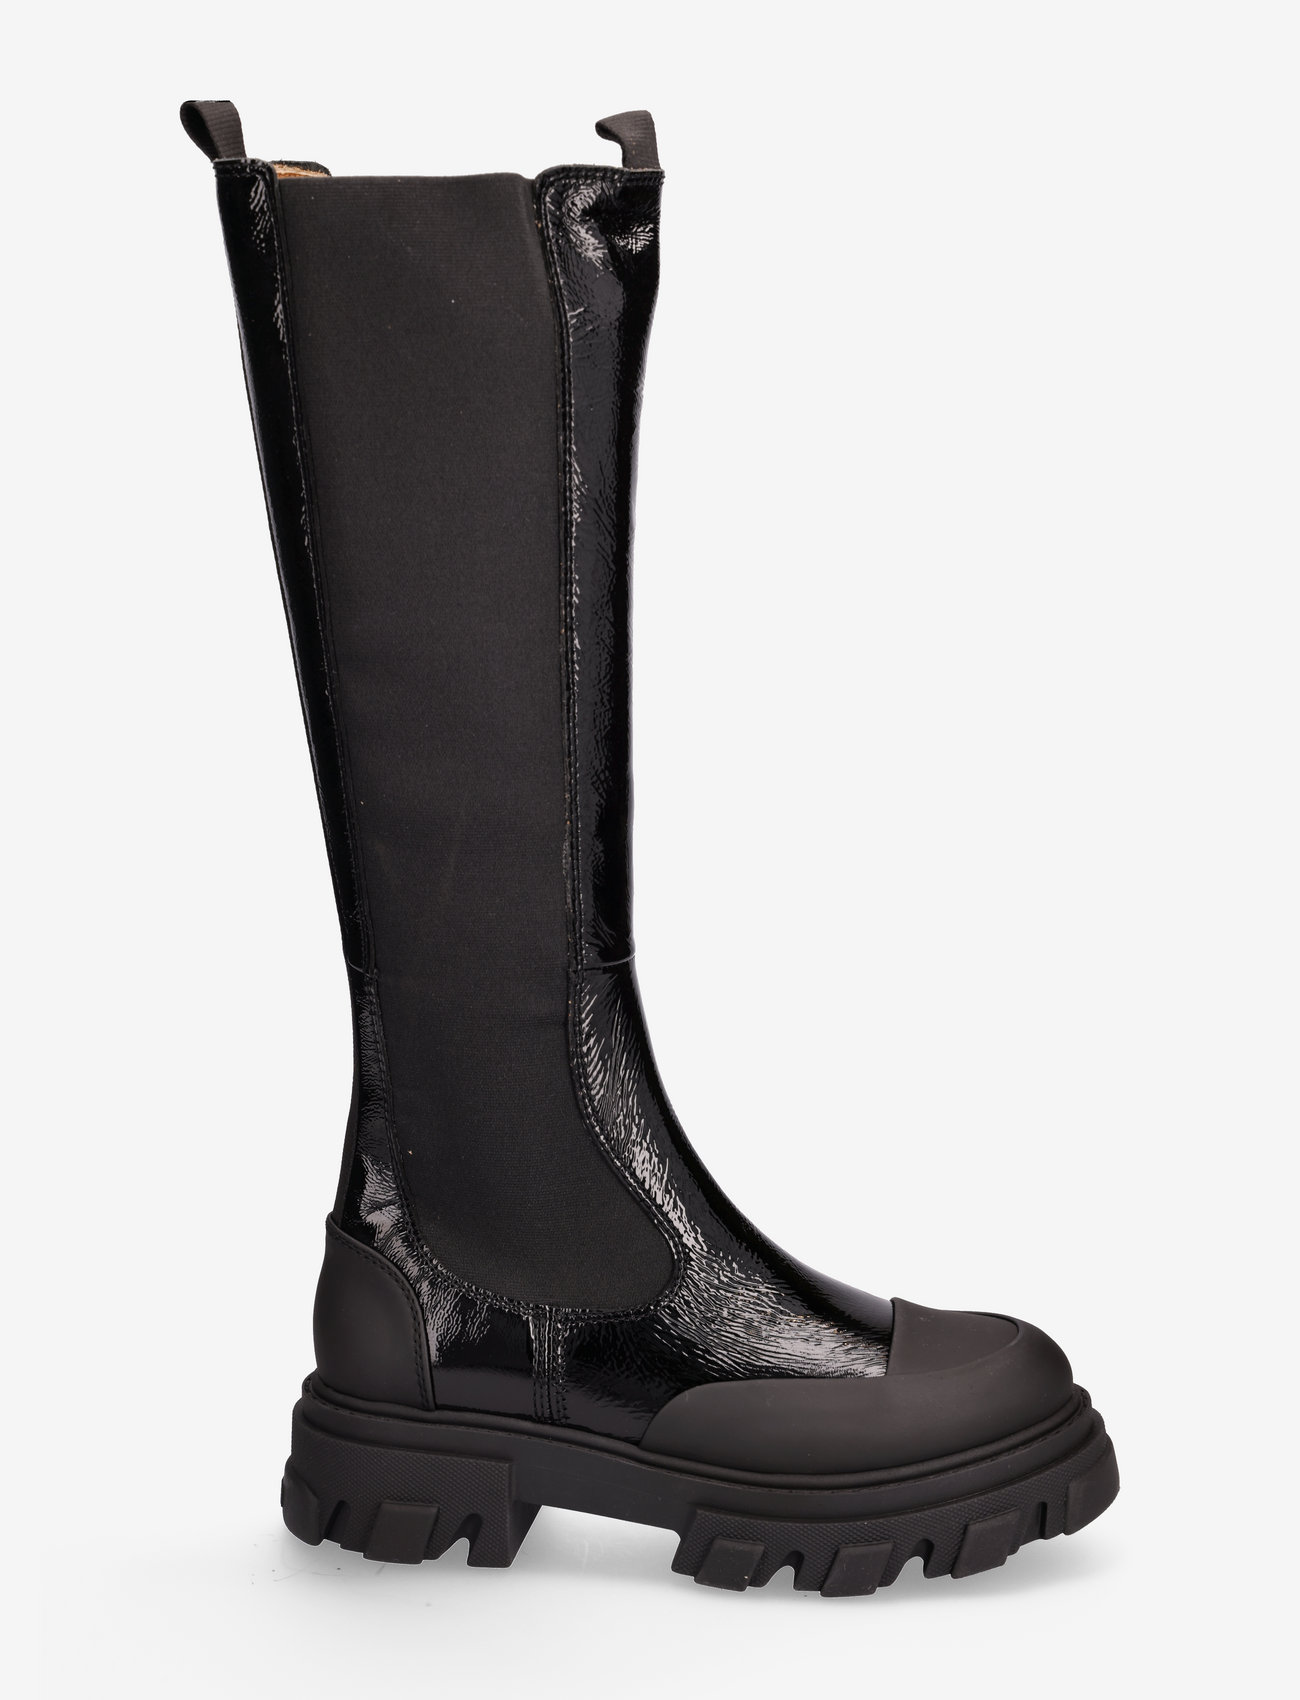 Ganni - Cleated - knee high boots - black - 1